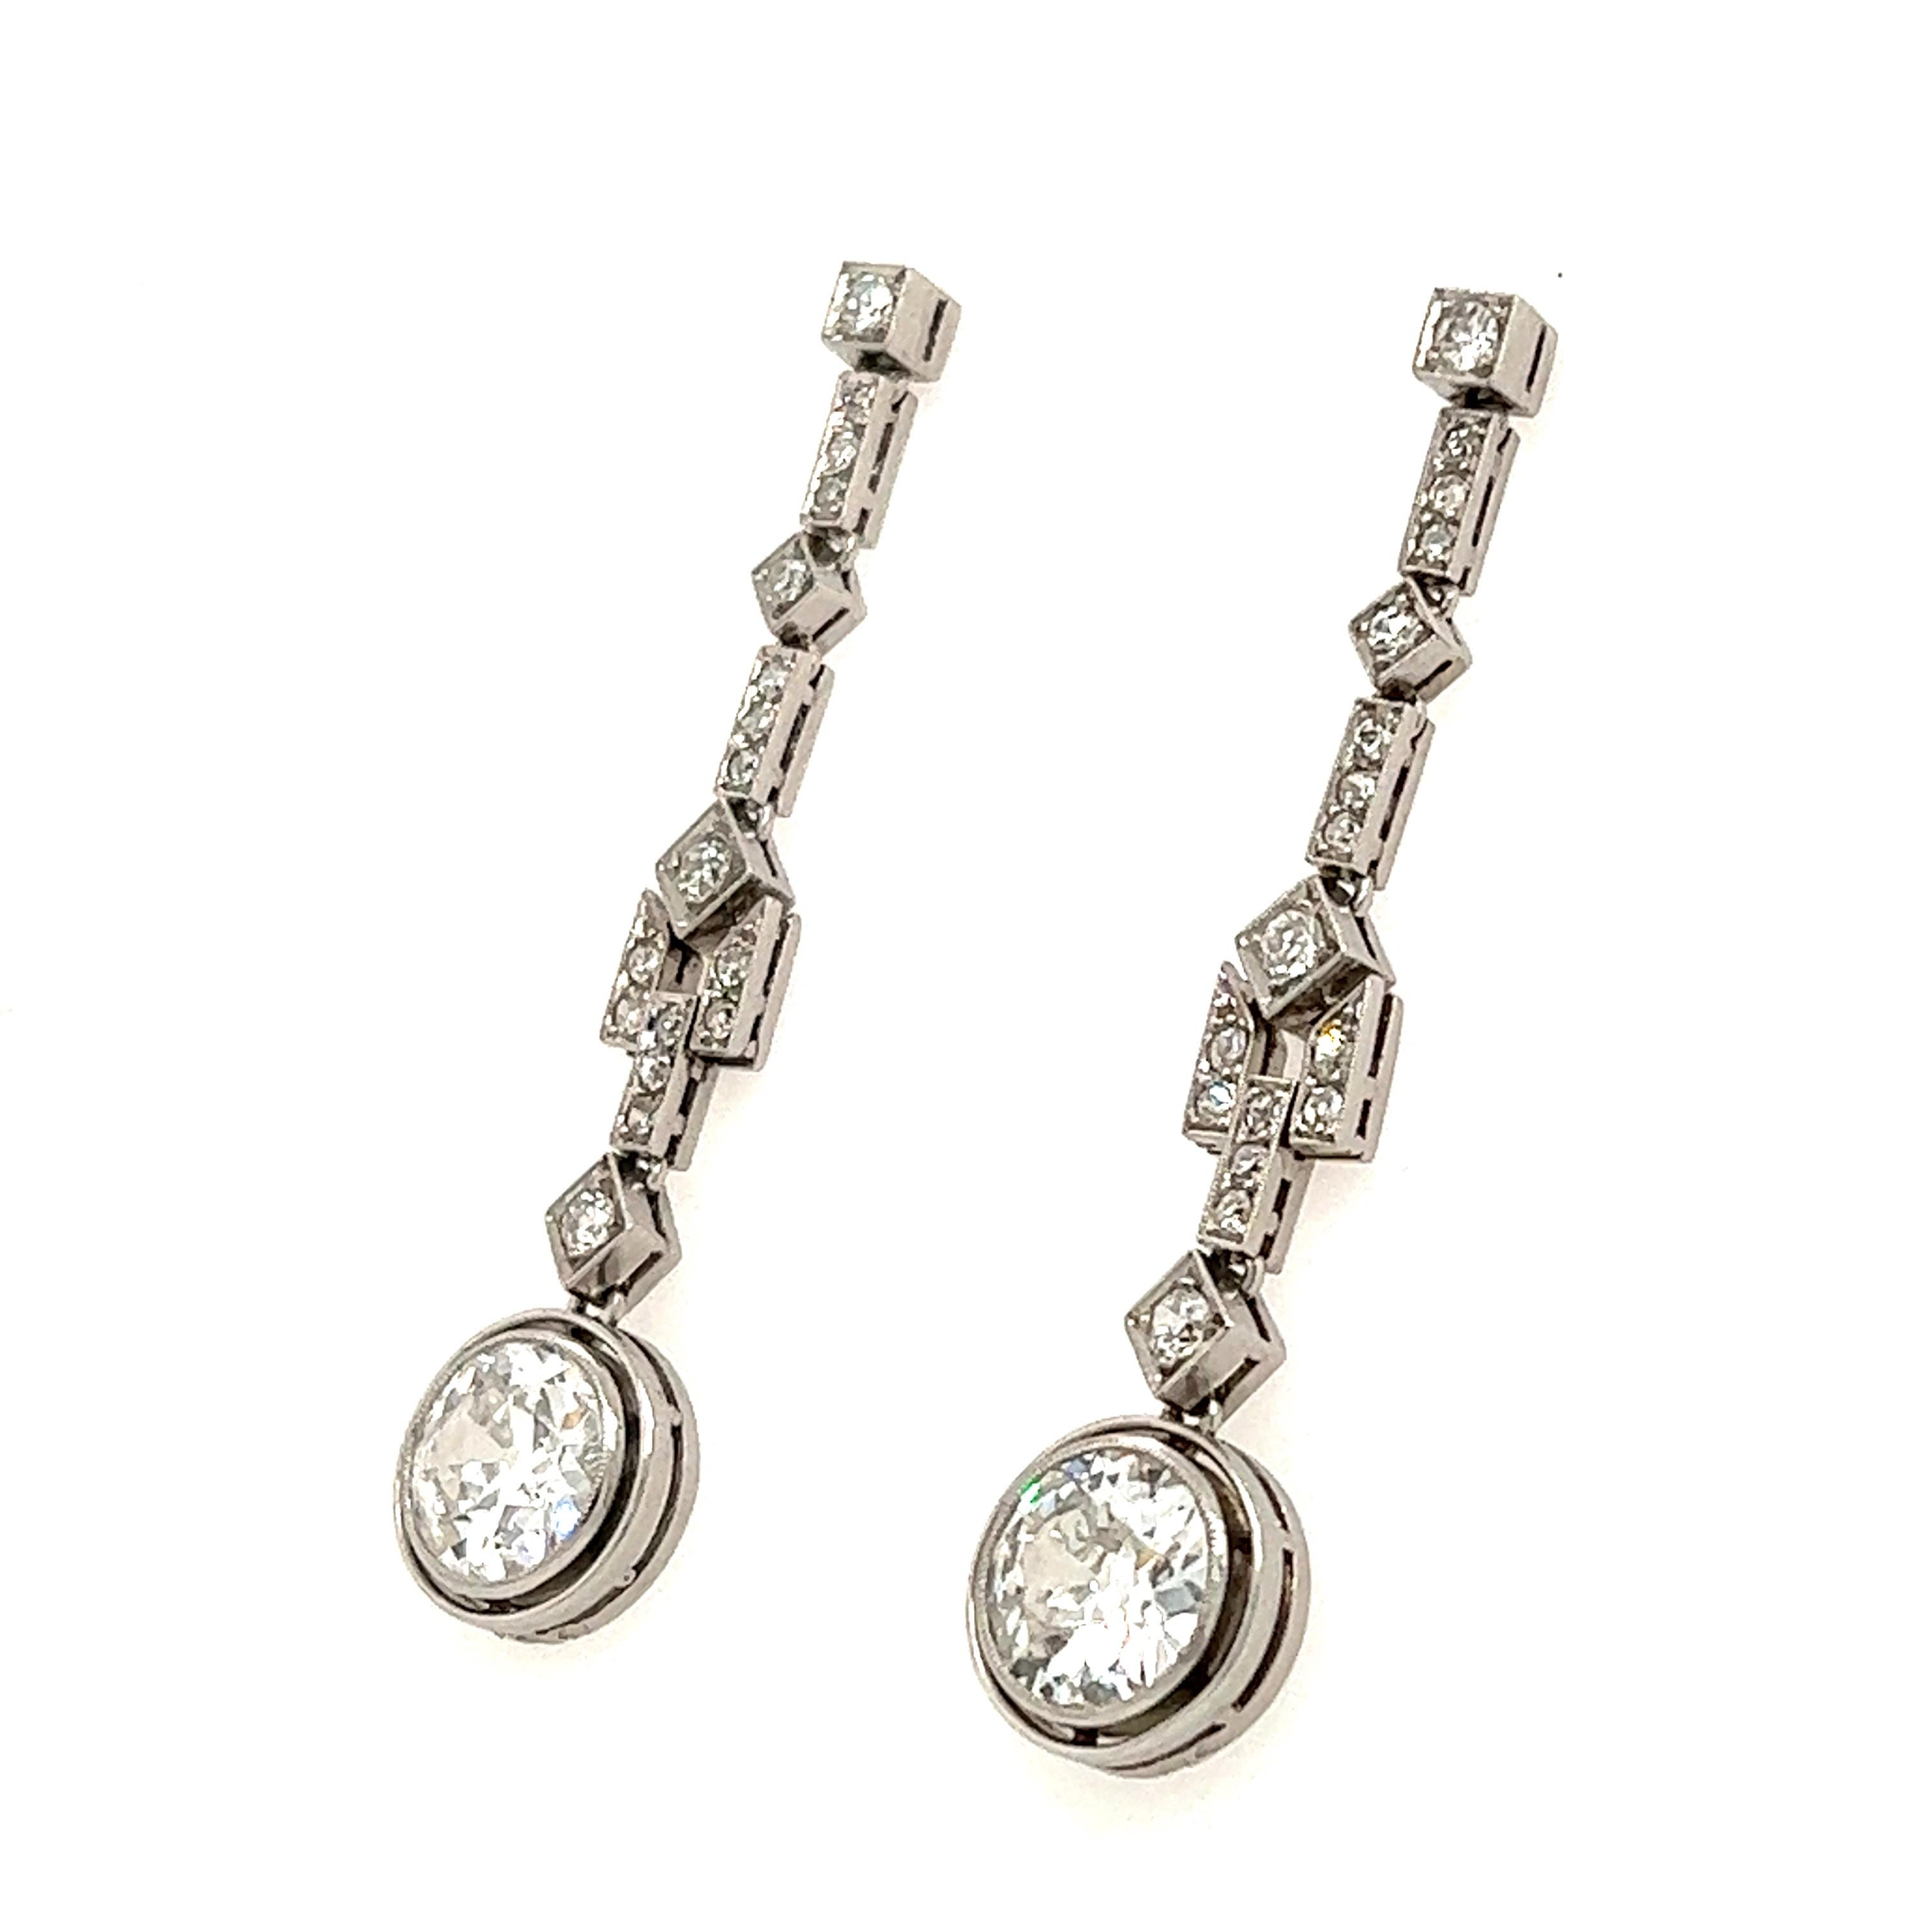 Amazing creation crafted over 100 years ago. This fantastic pair of earrings is crafted in platinum and has  truly stood the test of time as they are more beautiful today, than the day they were created. The earrings are set with approximately 4.60